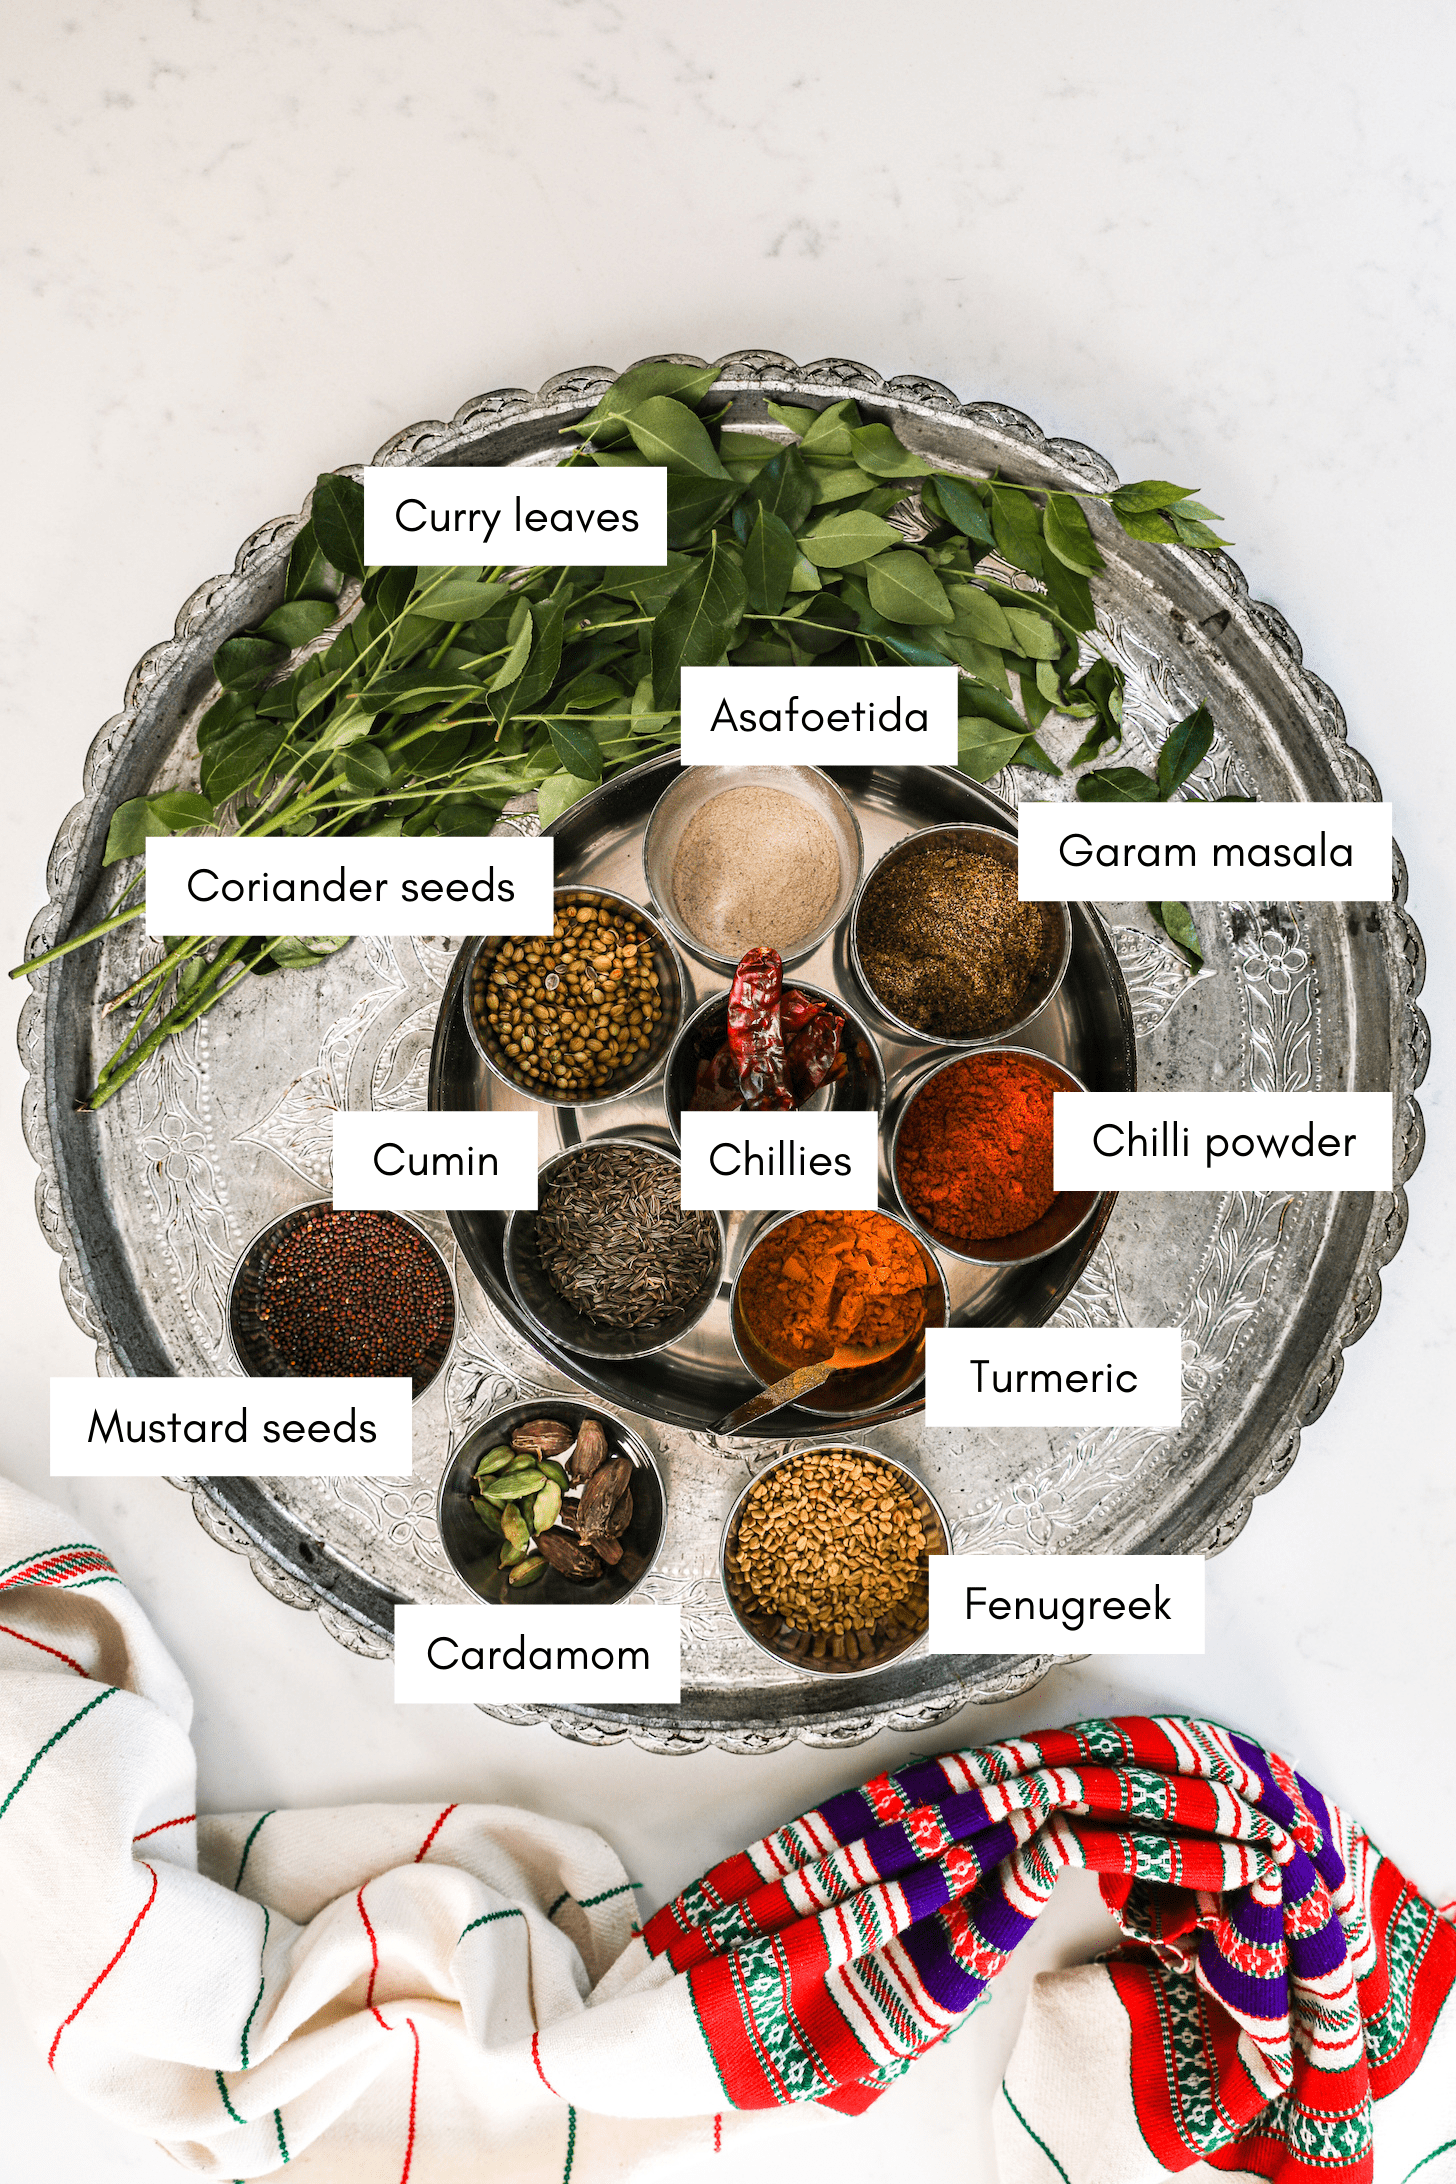 a silver round tray with a spice box containing small ramekins of dry and powdered spices and pile of green leaves on stems and a traditional South Asian scarf styles on the side.